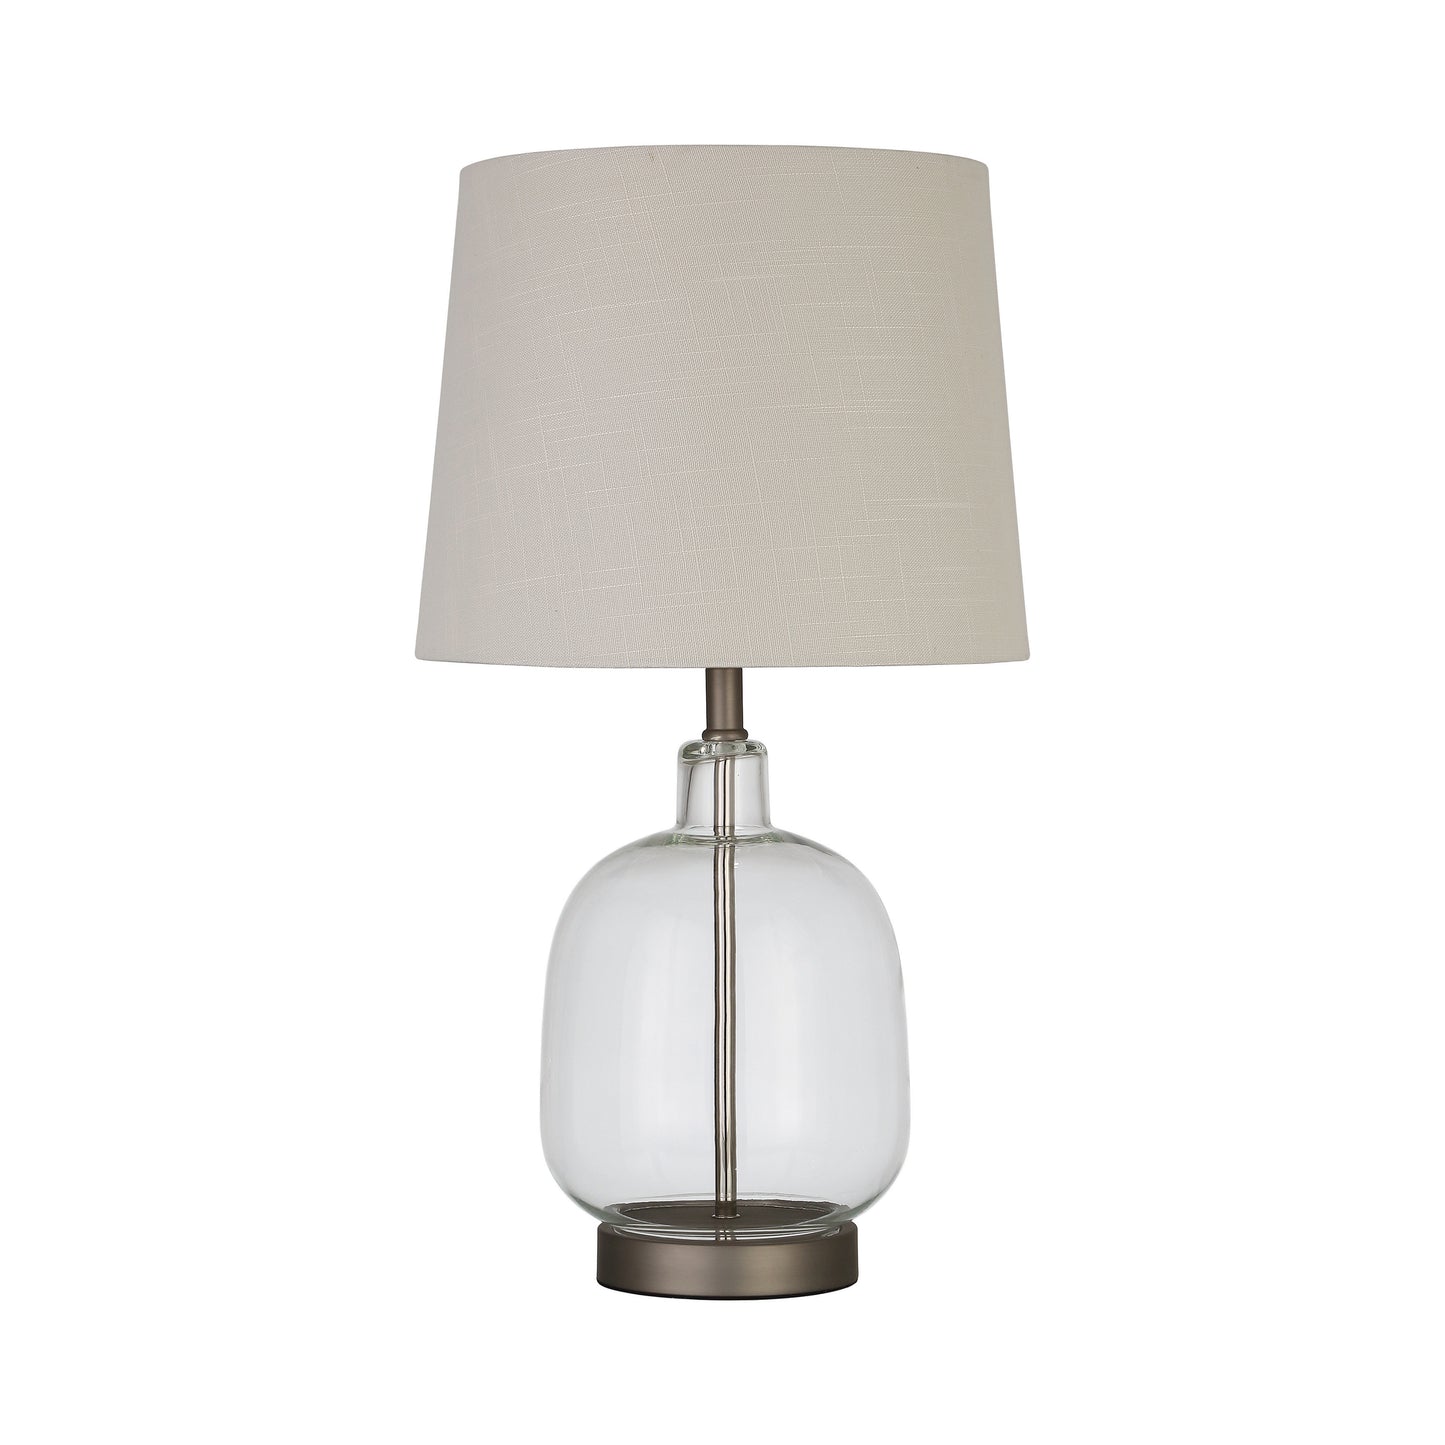 Empire Table Lamp Beige And Clear - 920017